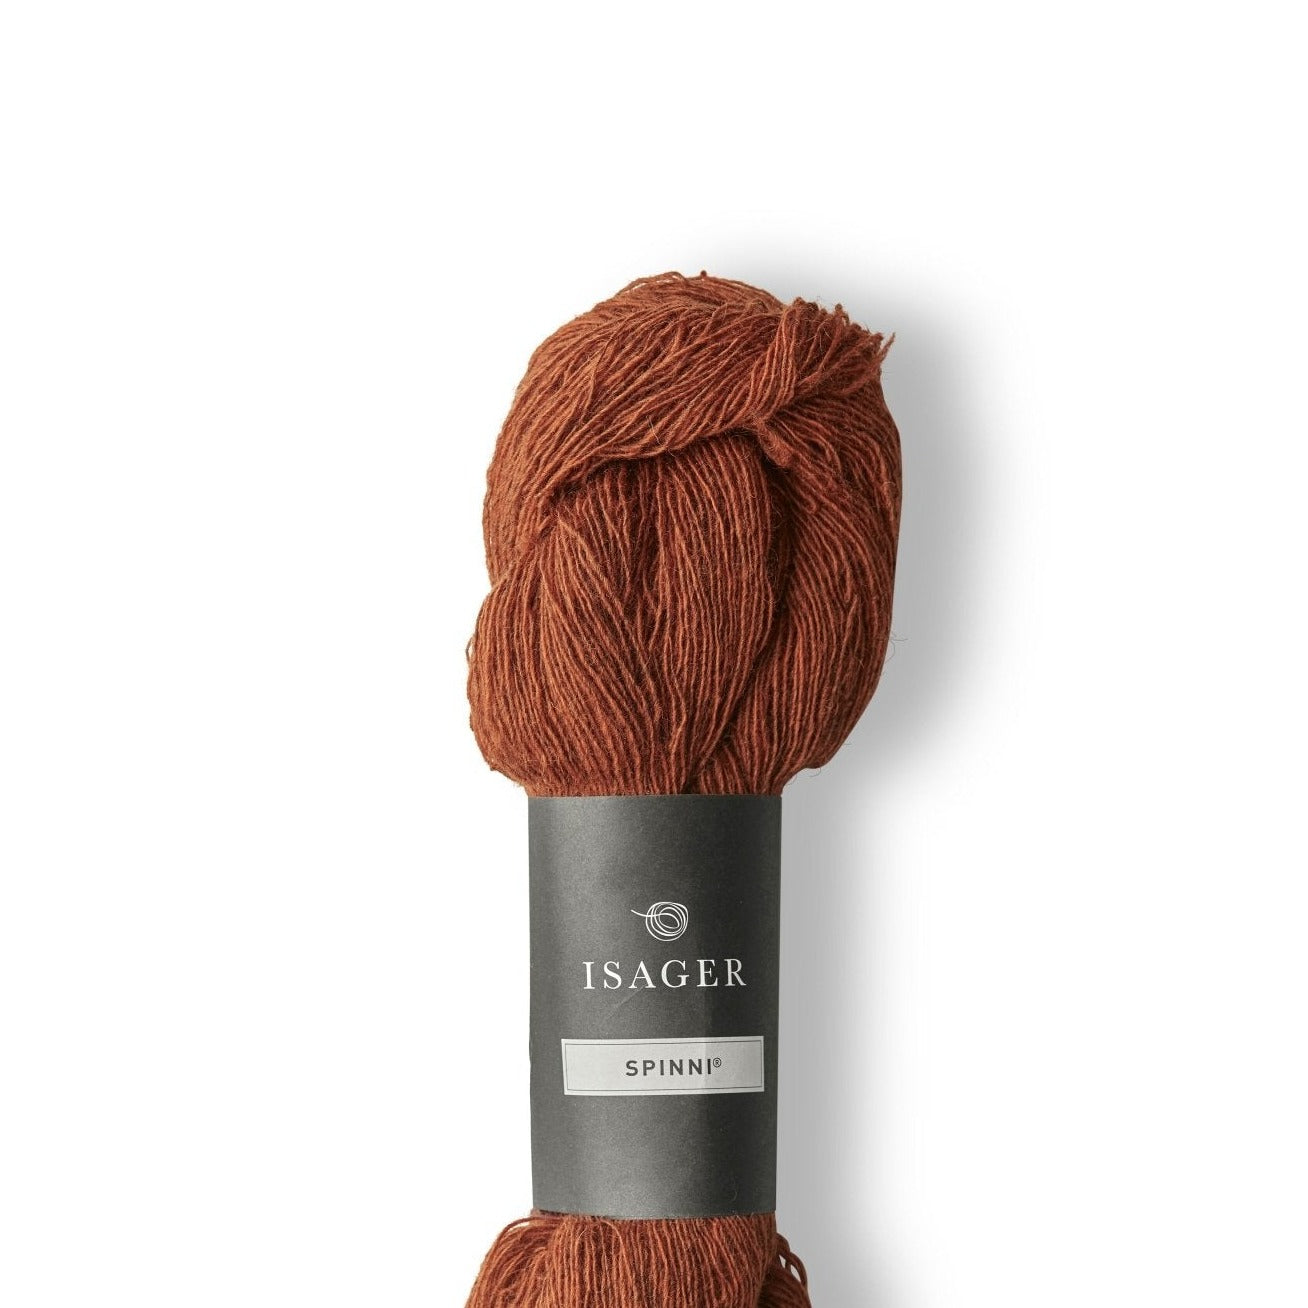 Isager Spinni - 1s - 2 Ply - Isager - The Little Yarn Store